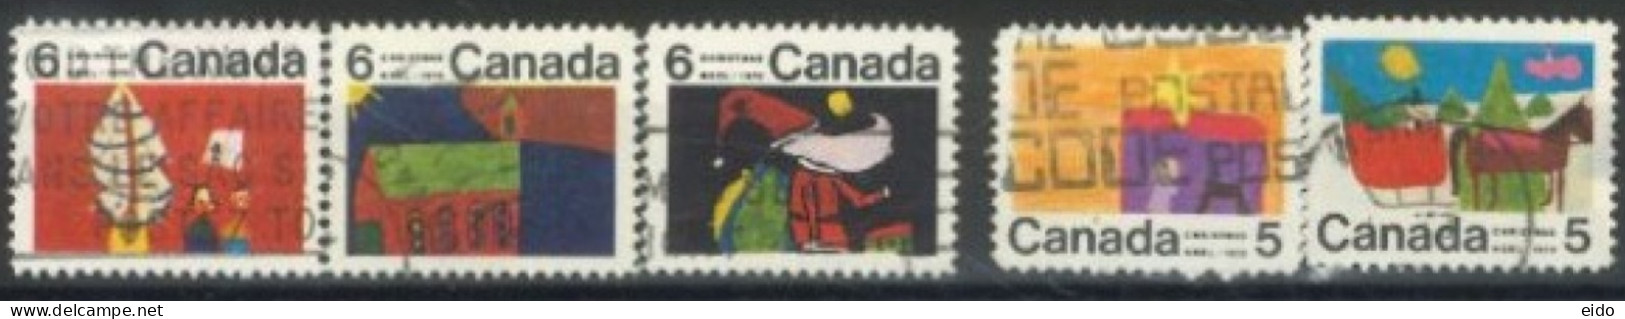 CANADA - 1970, CHRISTMAS STAMPS SET OF 5, USED. - Used Stamps